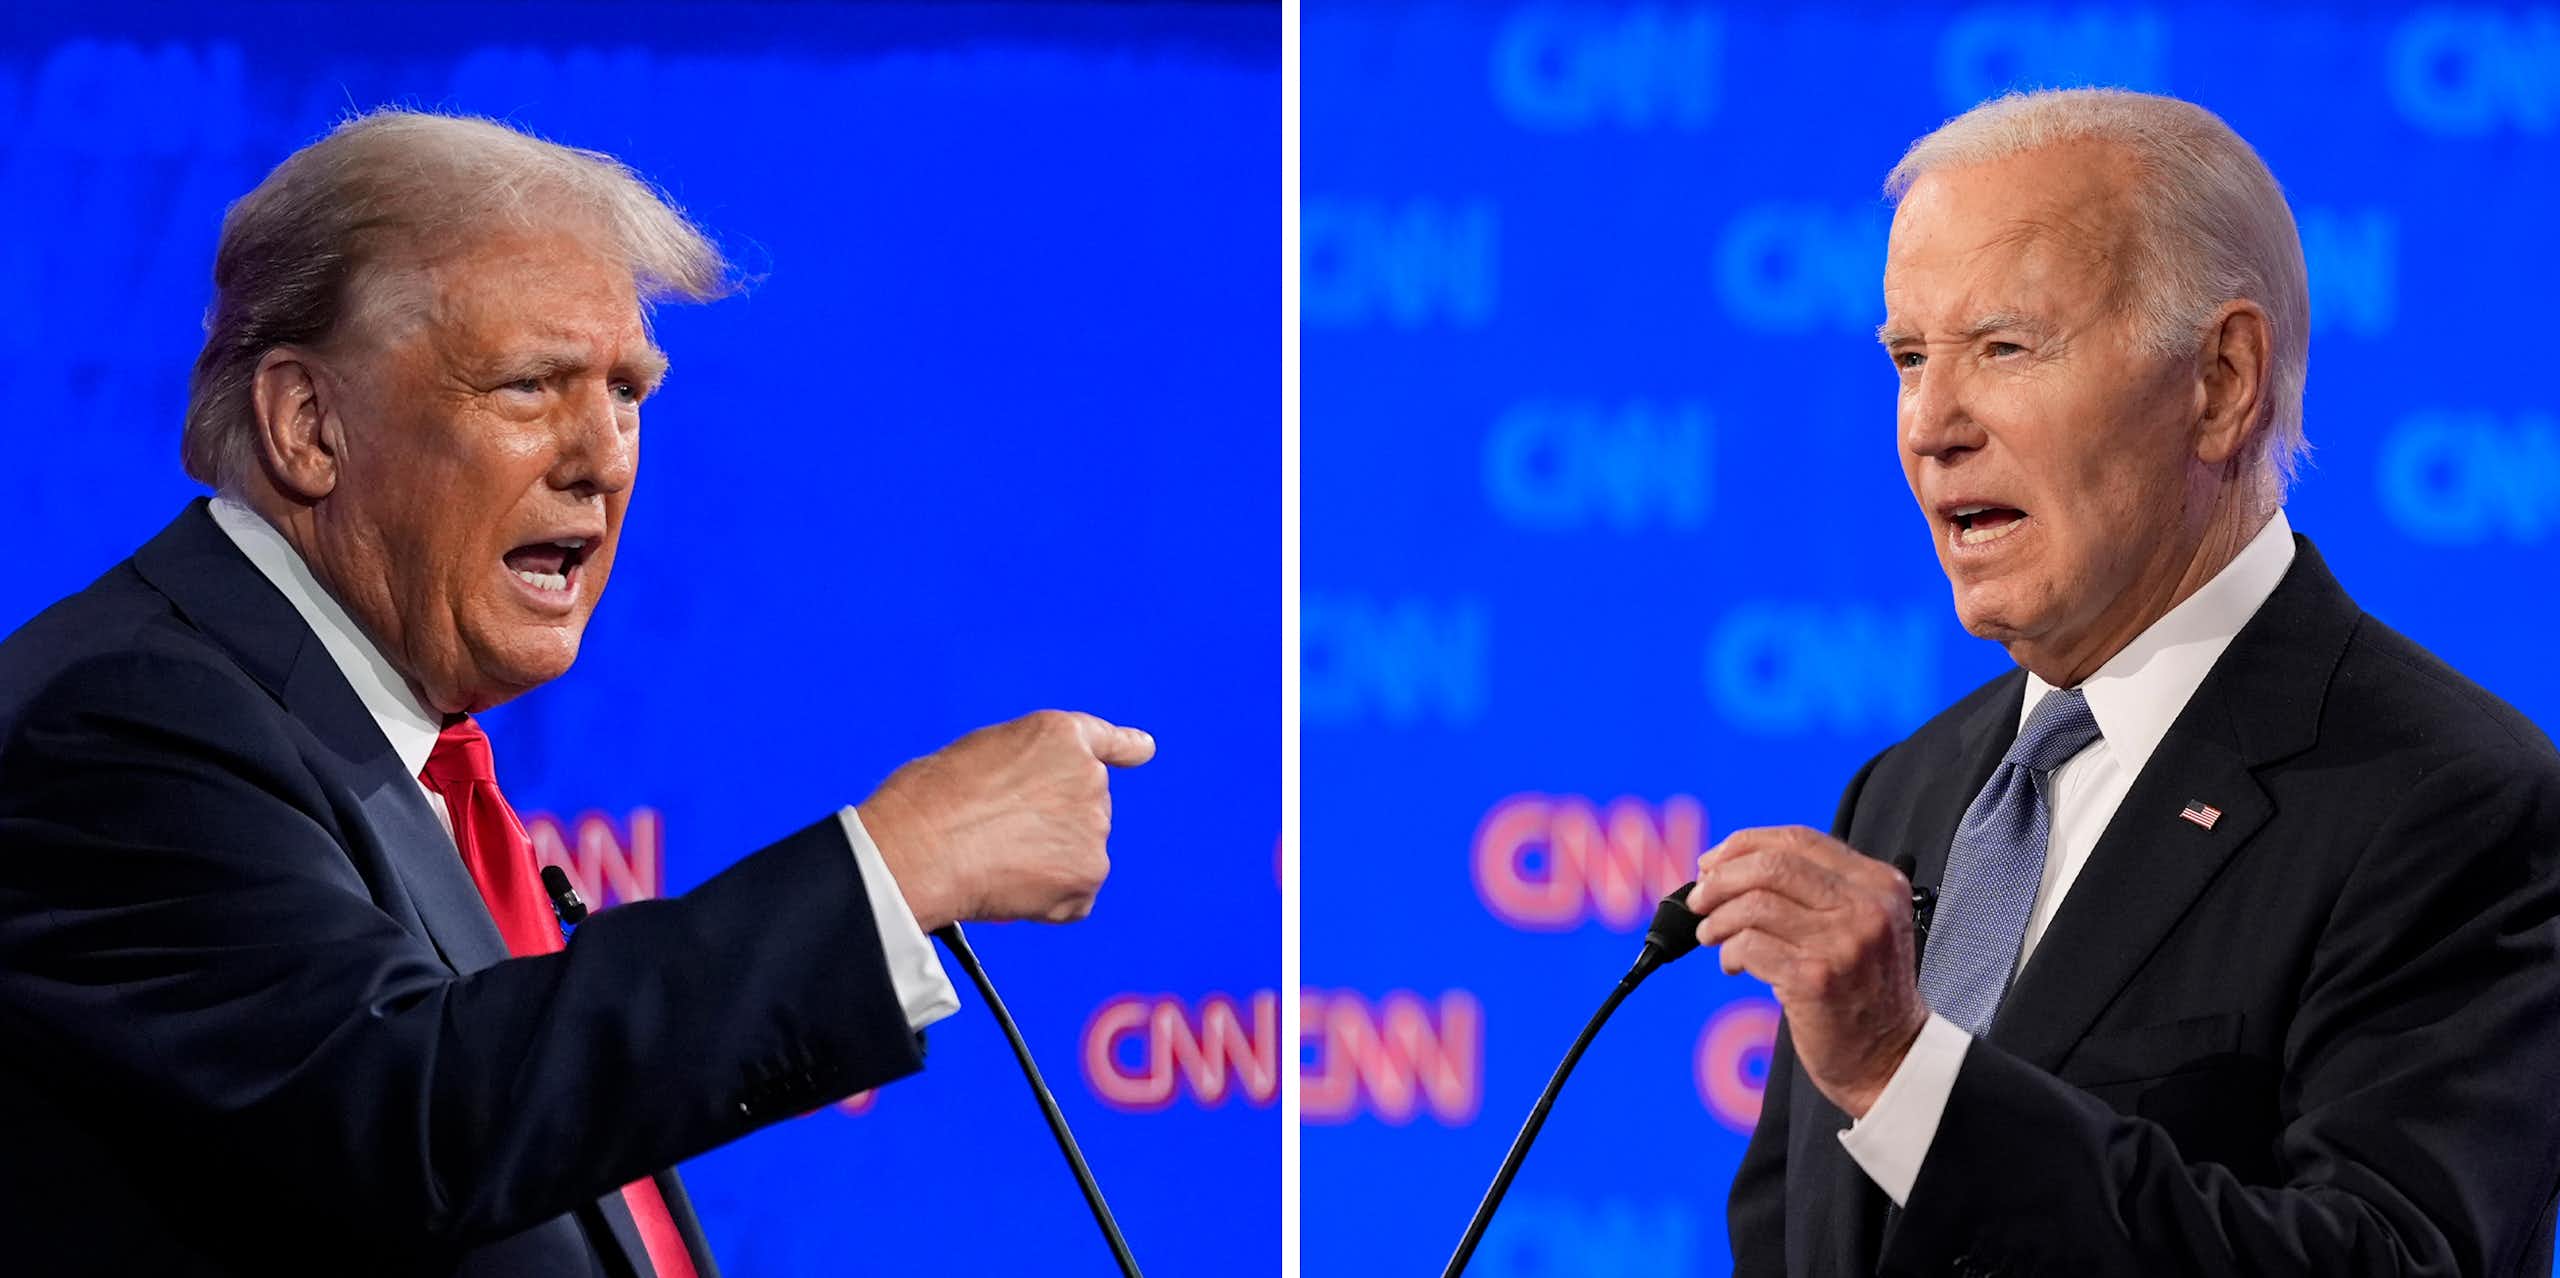 Muddled answers and outright lies: what the Biden-Trump debate says about the dire state of US politics